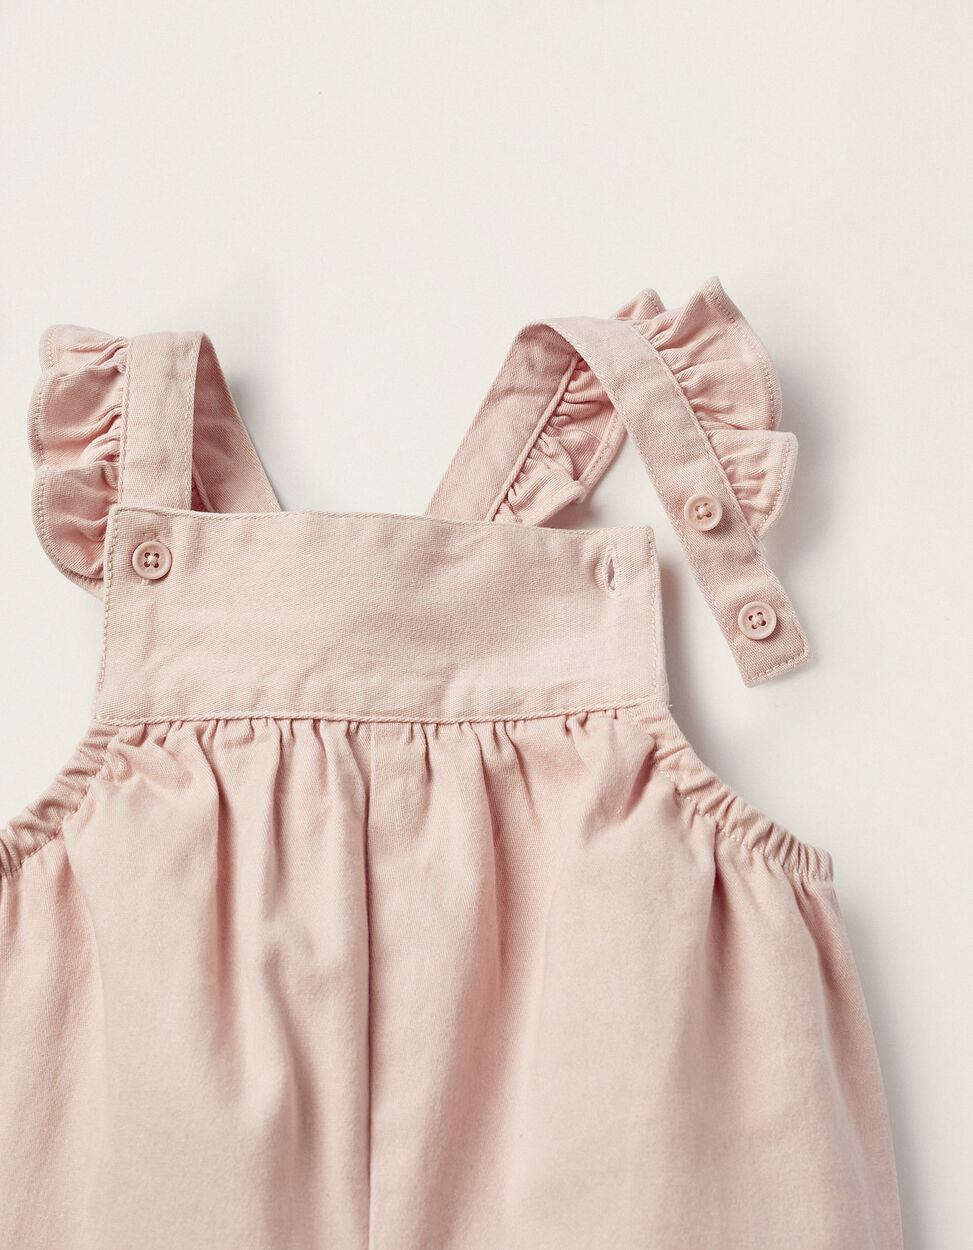 Buy Online Twill Jumpsuit with Ruffles for Newborn Girls, Light Pink